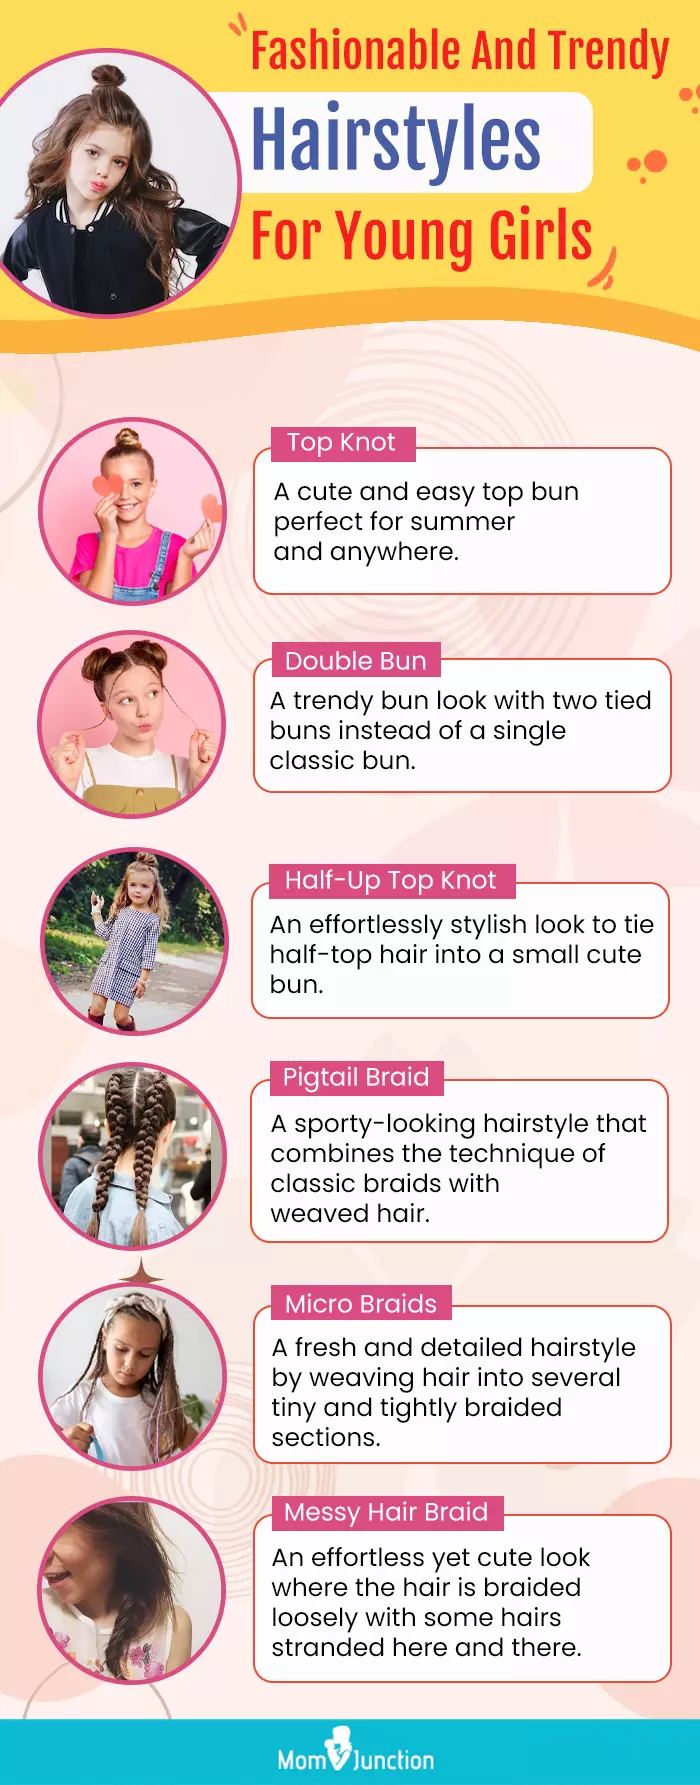 fashionable and trendy hairstyles for young girls (infographic)